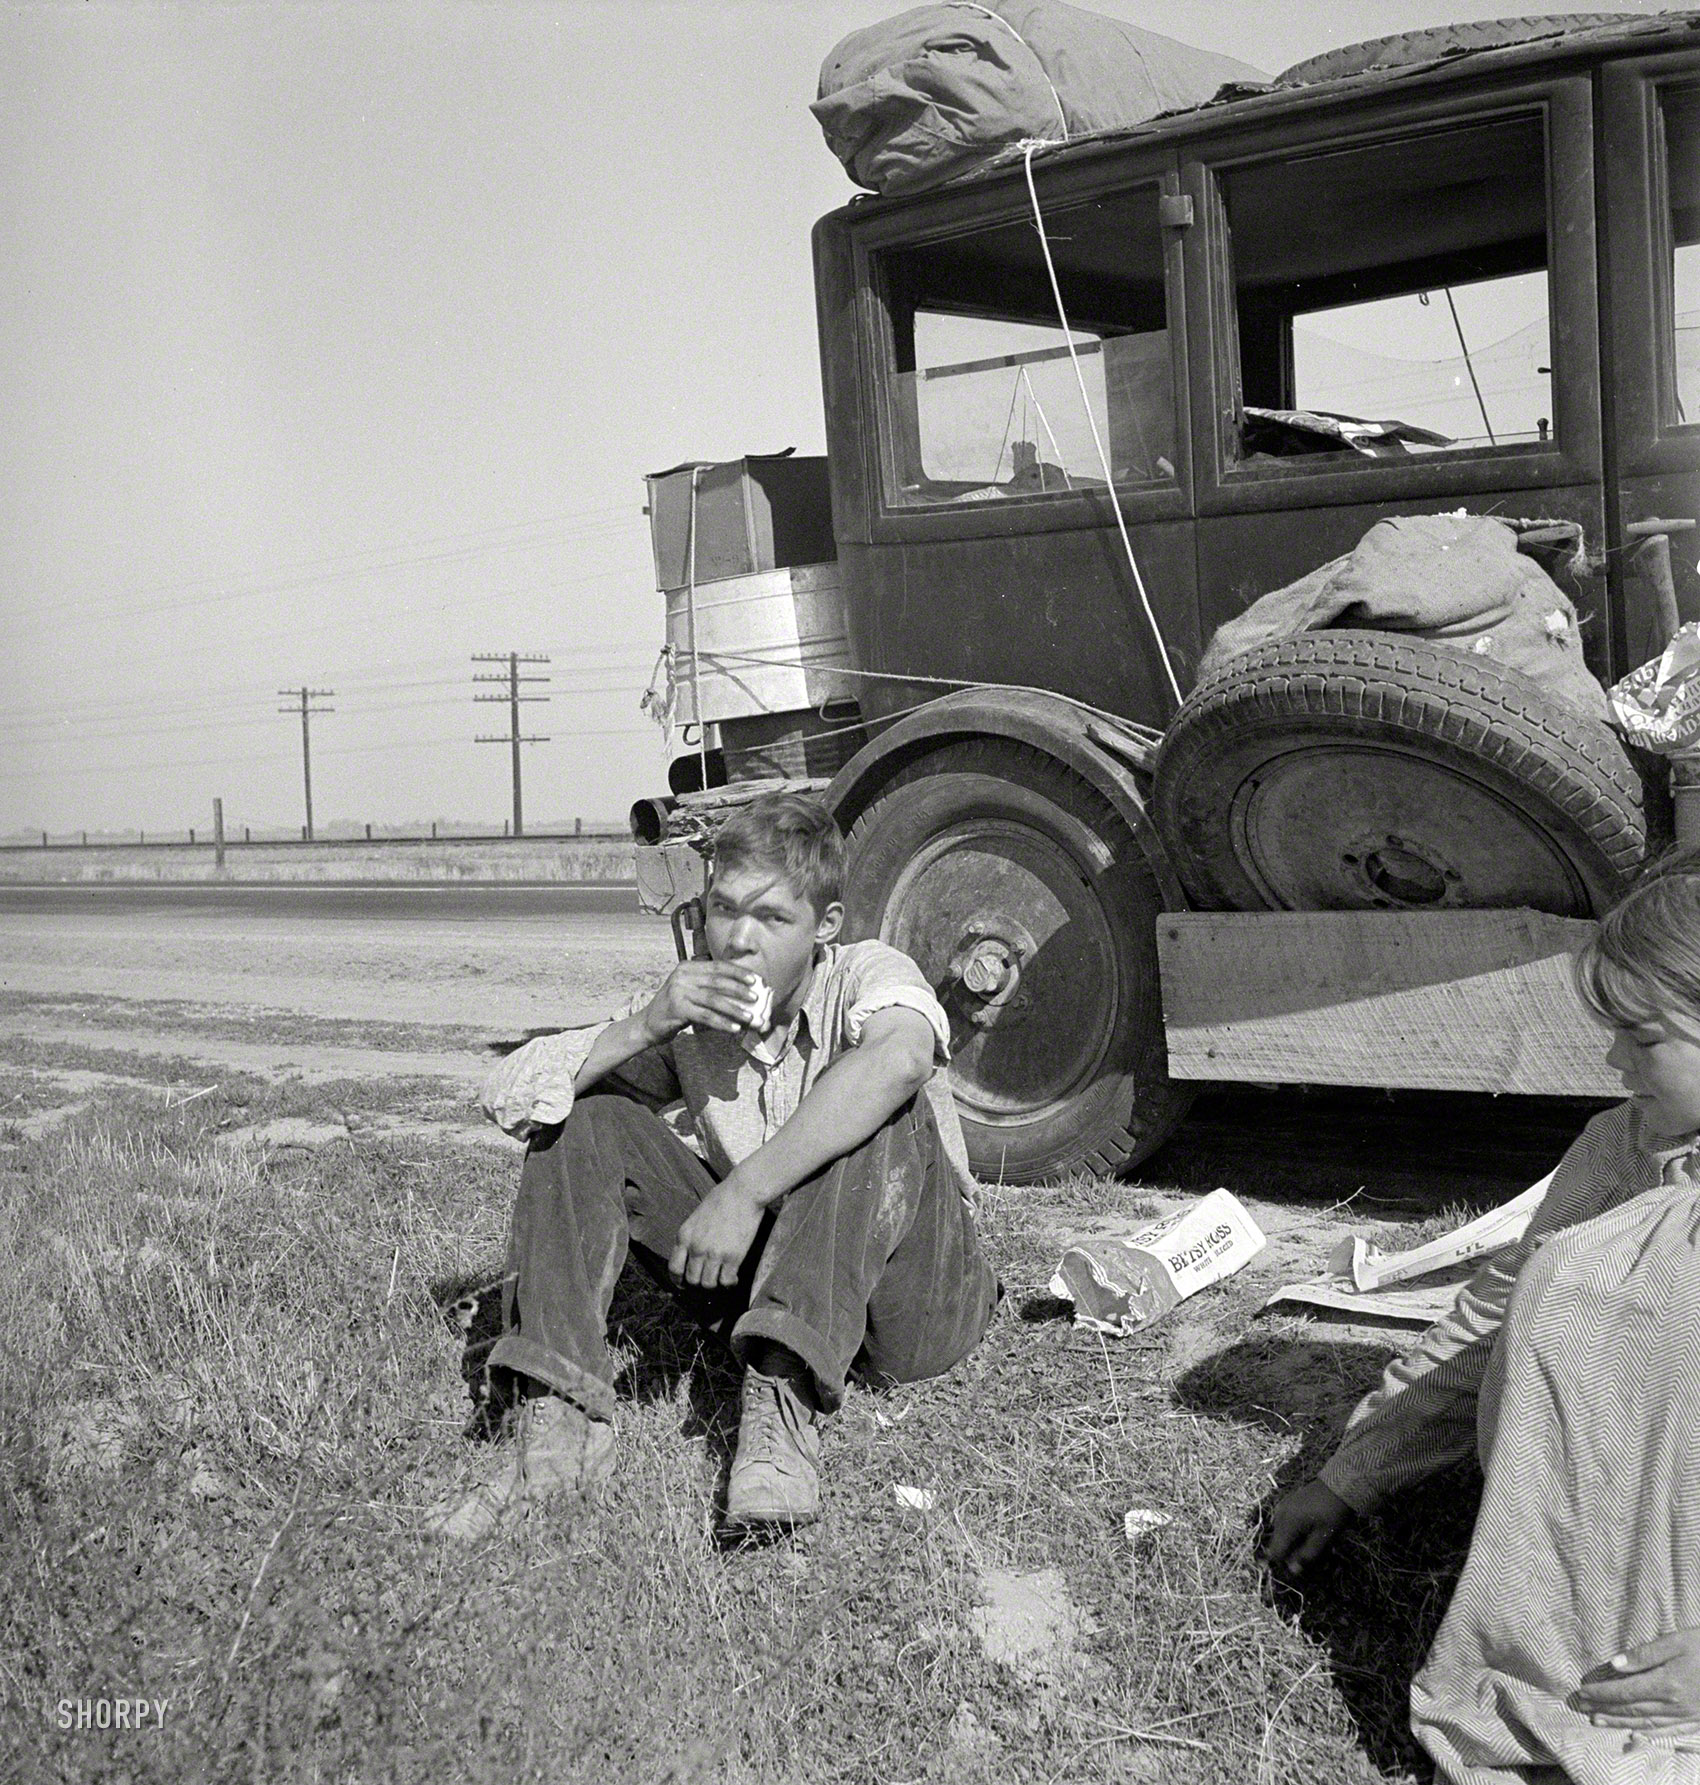 November 1936. Continuing the story of Mama's family. "Depression refugee family from Tulsa, Oklahoma. Arrived in California June 1936. Mother and three half-grown children; no father. Says the mother: 'Anybody wants to work can get by. But if a person loses their faith in the soil like so many of them back there in Oklahoma, then there ain't no hope for them. We're making it all right here, all but for the schooling, 'cause that boy of mine, he wants to go to the University'." Photo by Dorothea Lange for the Resettlement Administration. View full size.